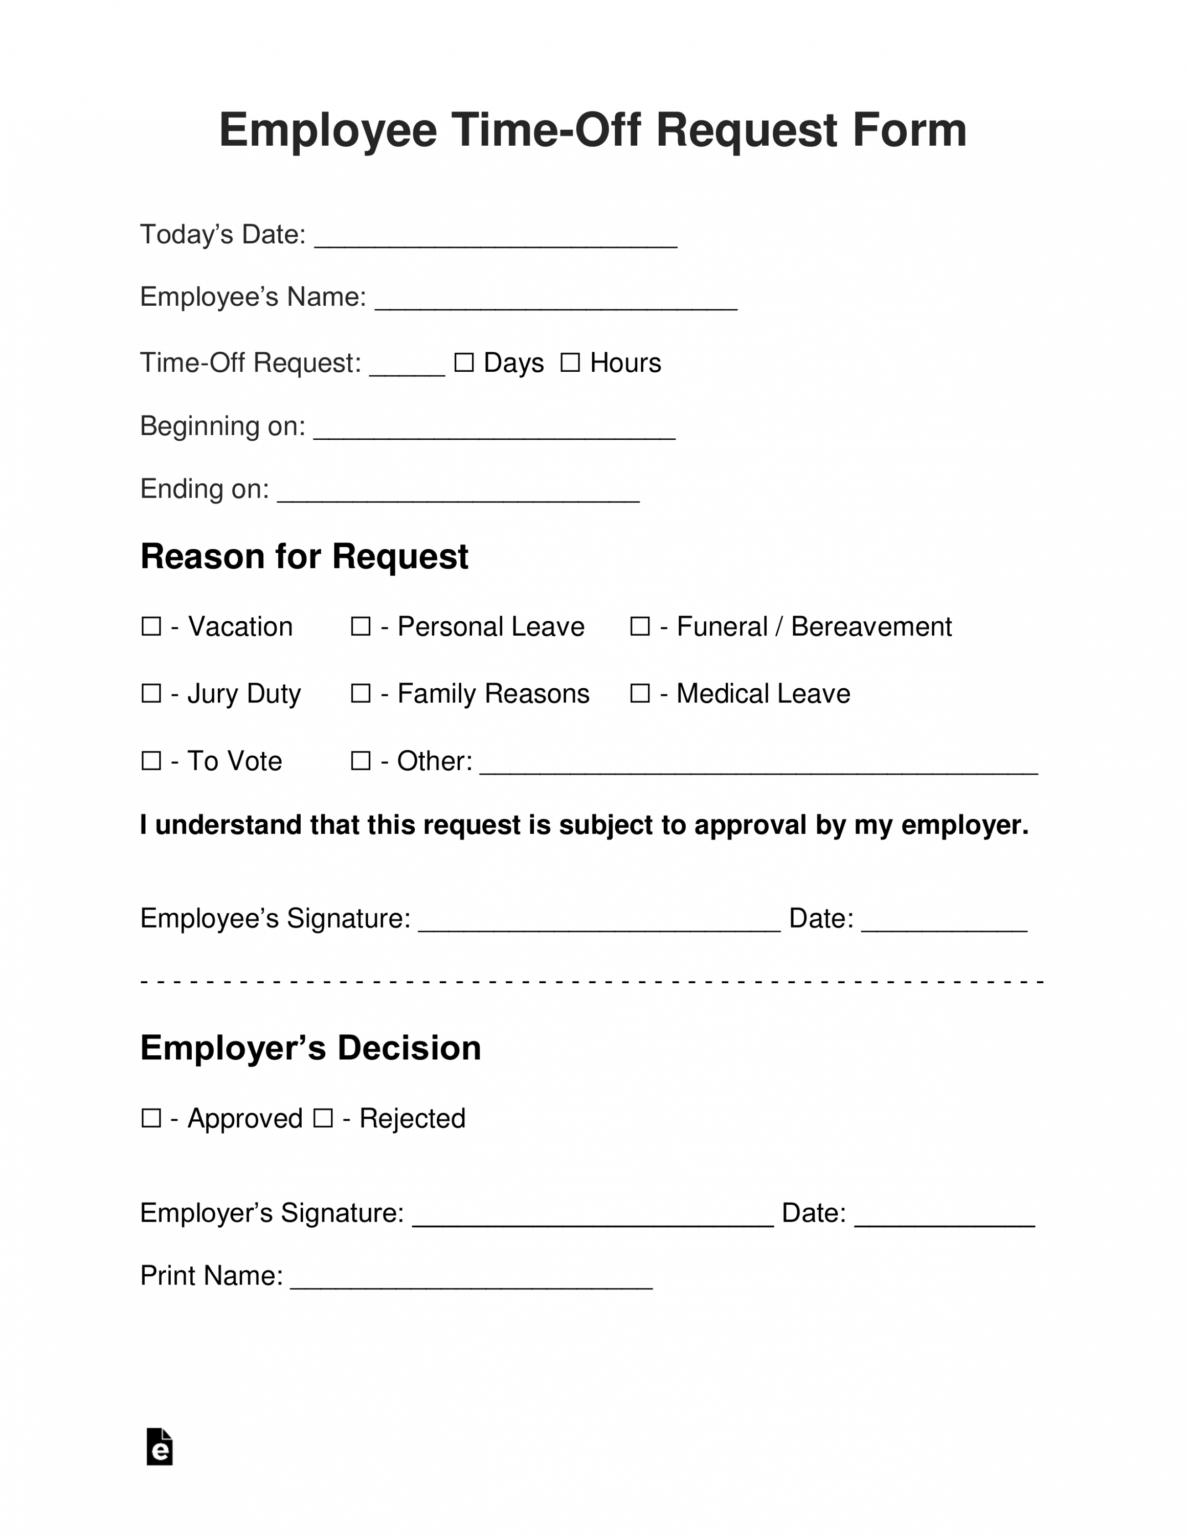 sample-employee-timeoff-vacation-request-form-eforms-employee-vacation